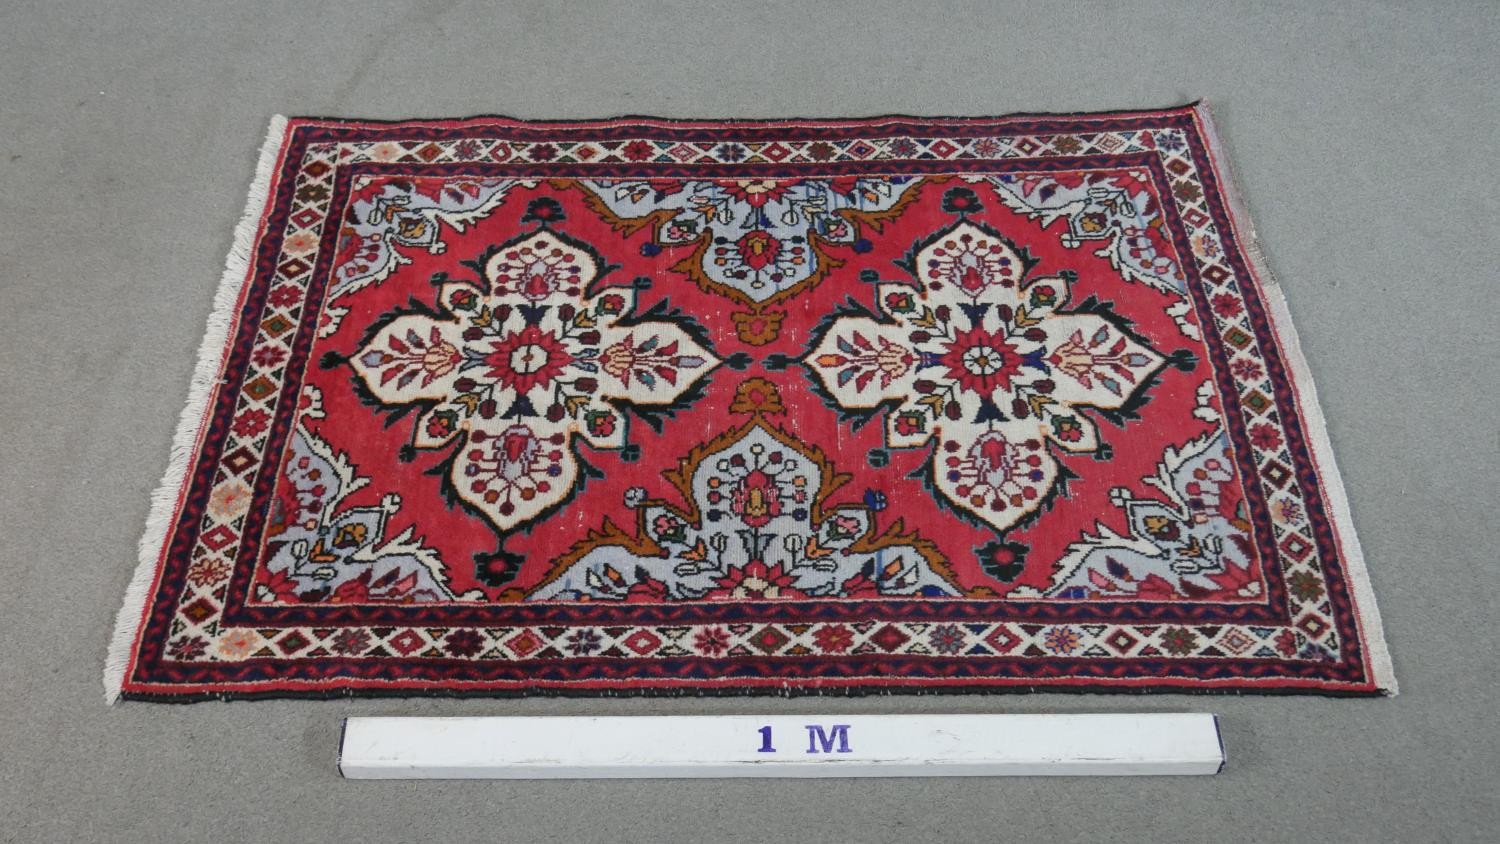 A handmade Persian Hamadan rug with repeating floral motifs across the madder ground within - Image 2 of 7